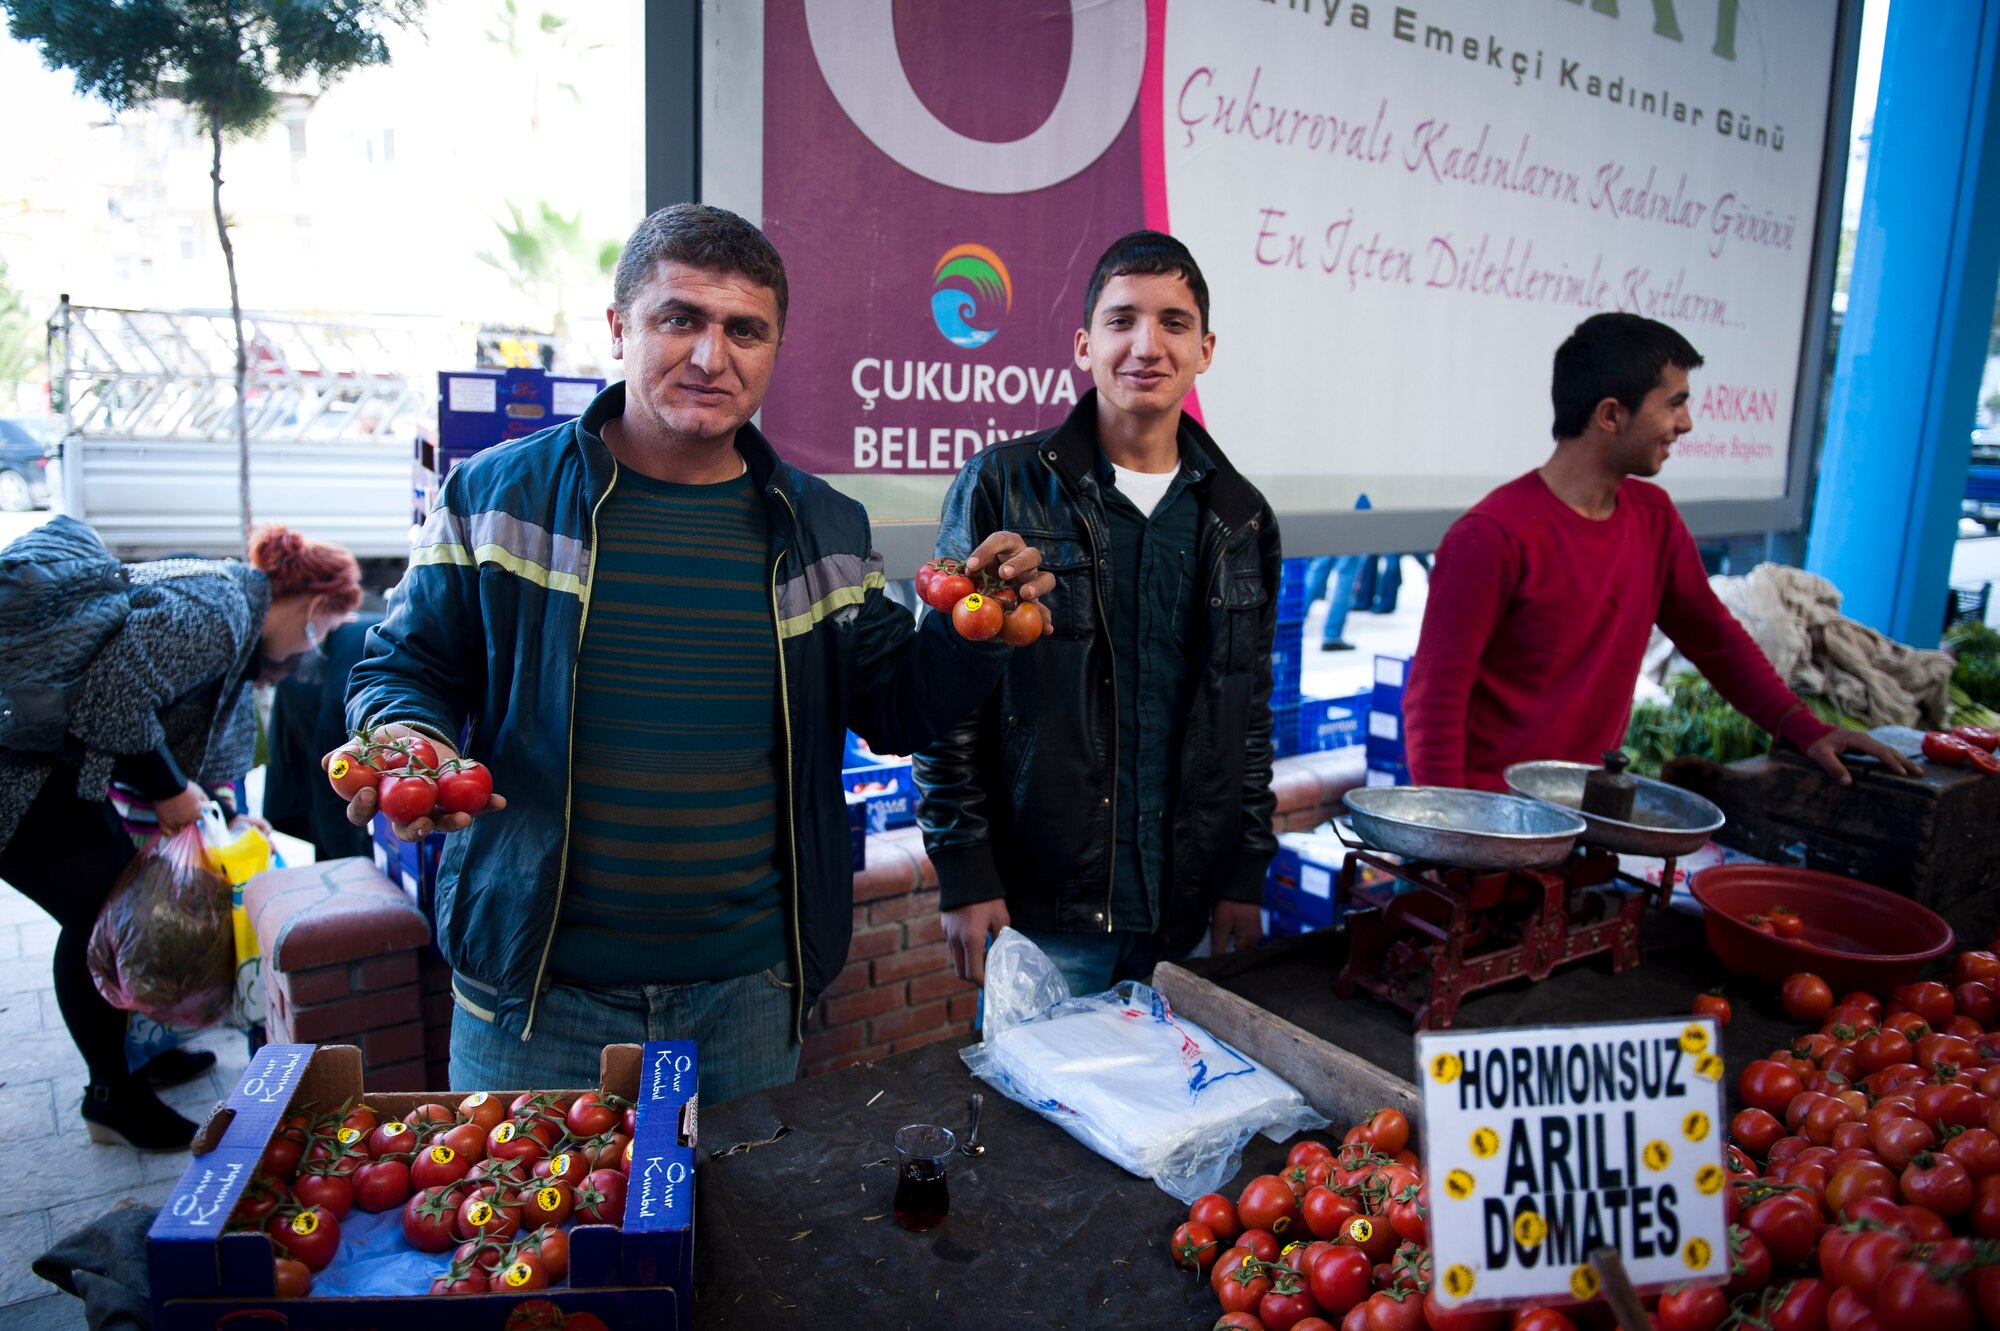 Vendors display their tomatoes at a farmers market March 8, 2012, in Adana, Turkey. The fertile soil around Adana allows farmers to grow many types of produce, keeping prices low and fruits and vegetables fresh. (U.S. Air Force photo by Tech. Sgt. Michael B. Keller/Released)